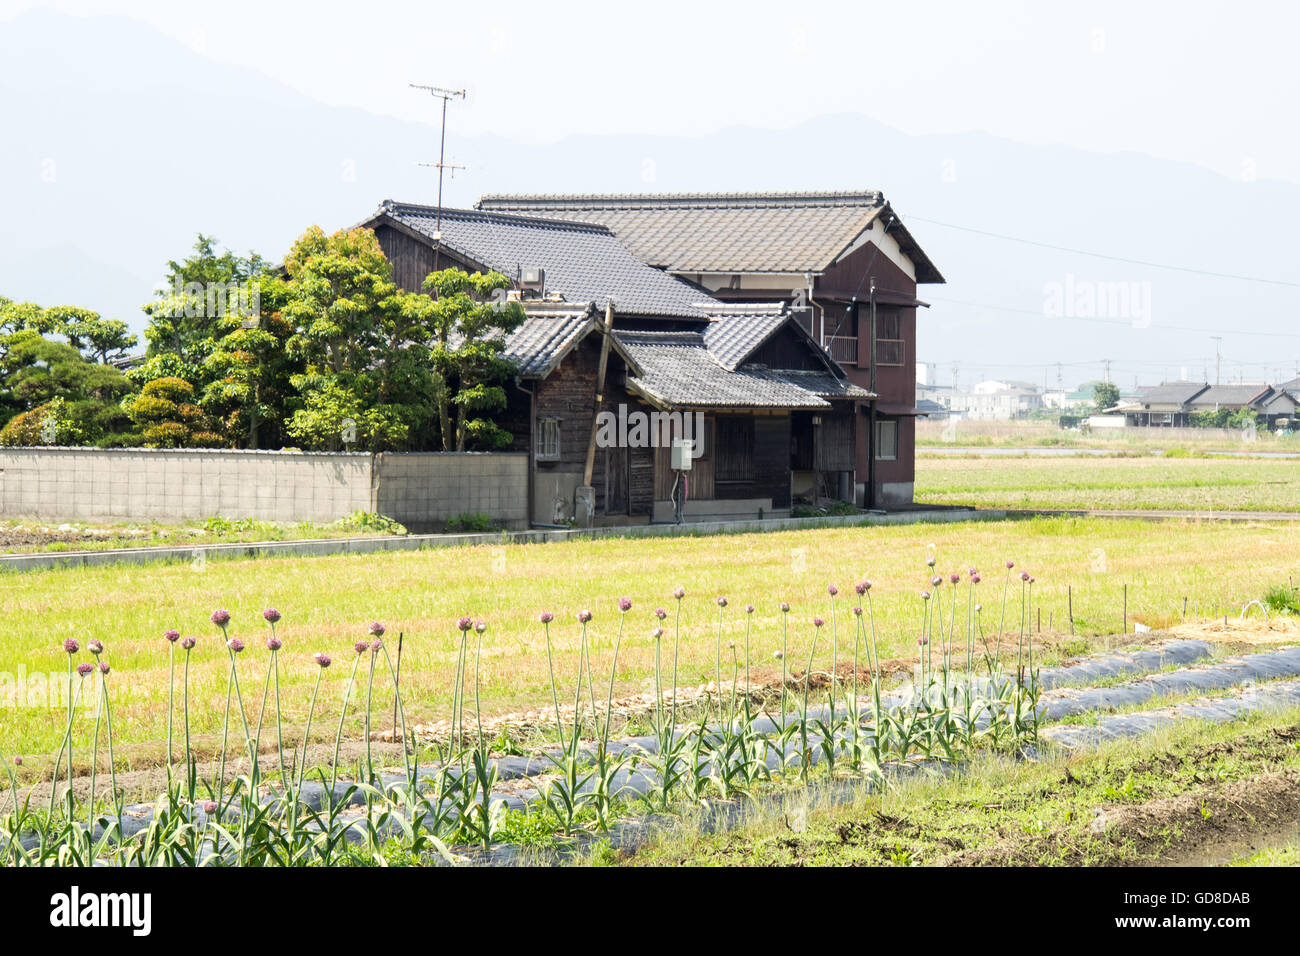 A traditional wooden Japanese house. Stock Photo